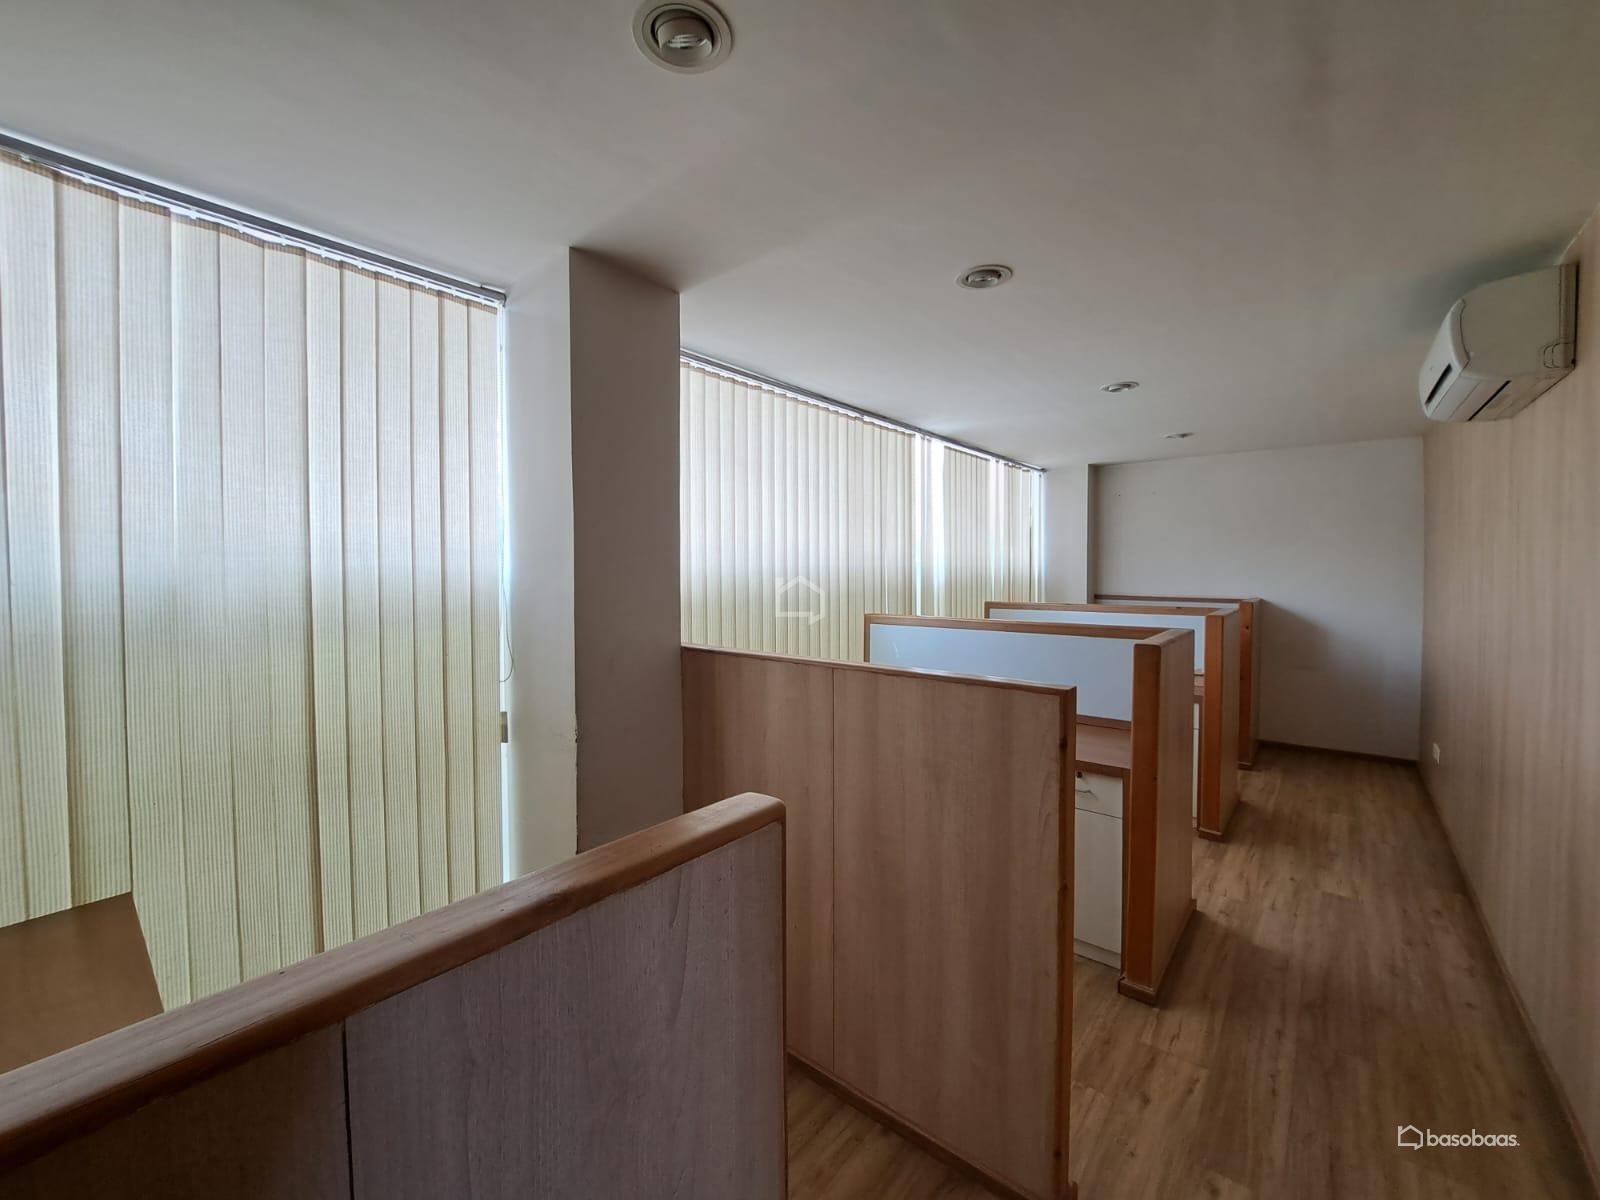 COMMERCIAL : Office Space for Rent in Baneshwor, Kathmandu Image 3